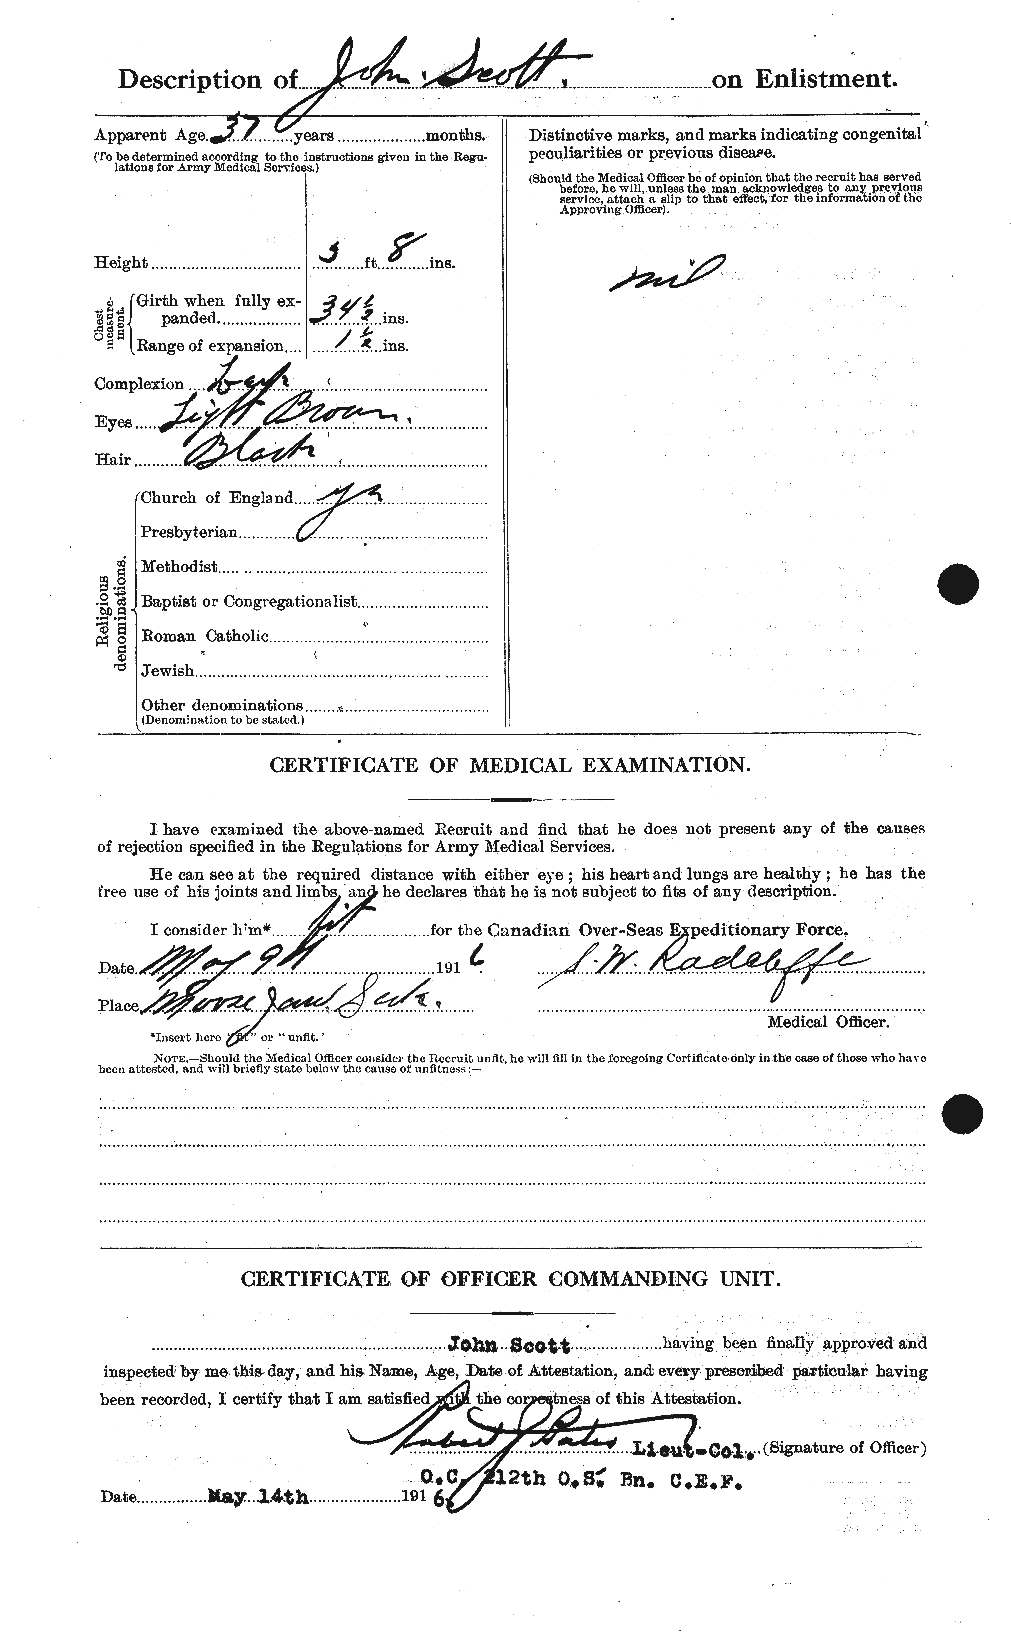 Personnel Records of the First World War - CEF 084912b